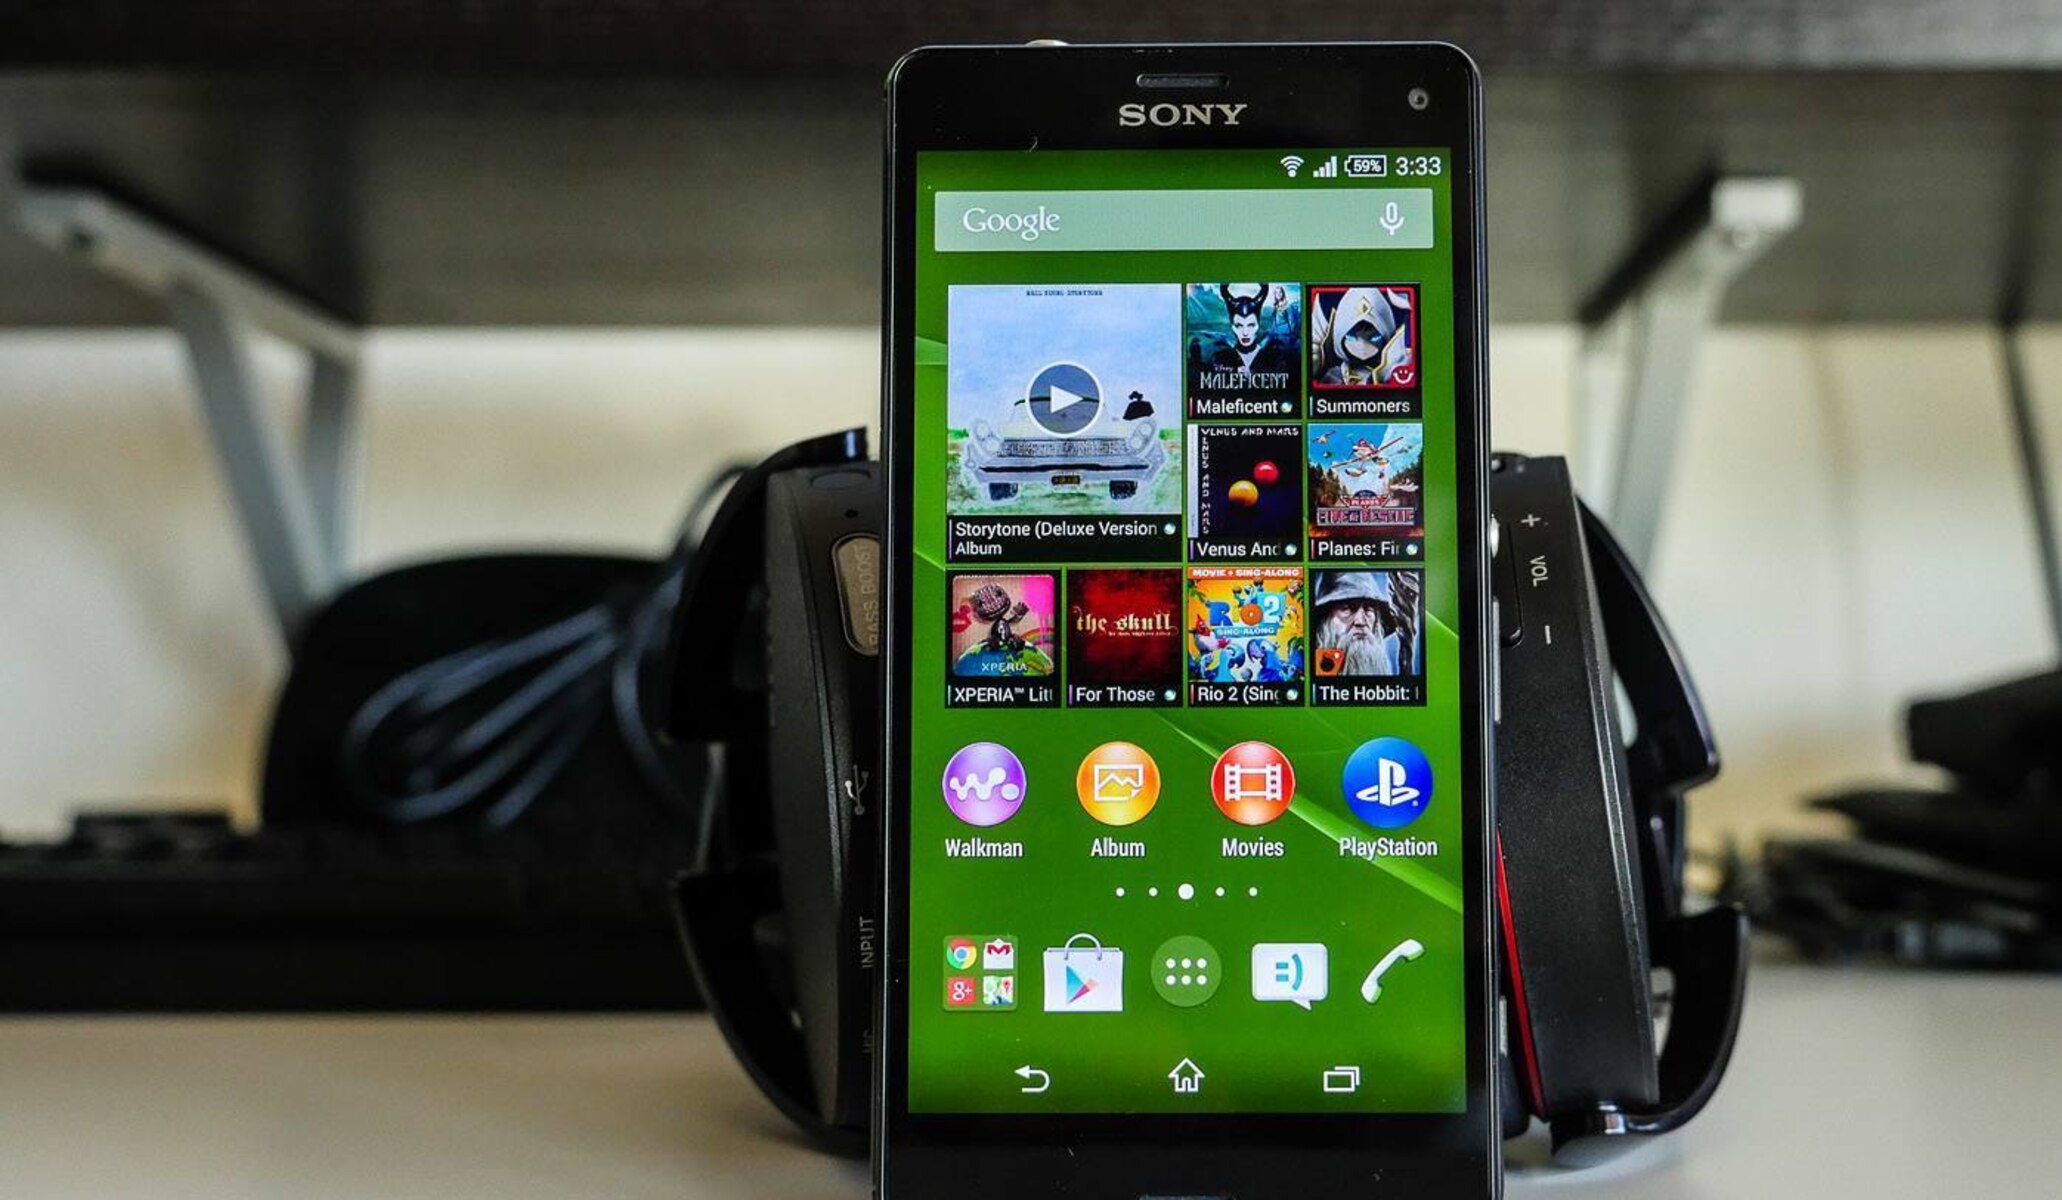 syncing-music-to-your-sony-xperia-z3